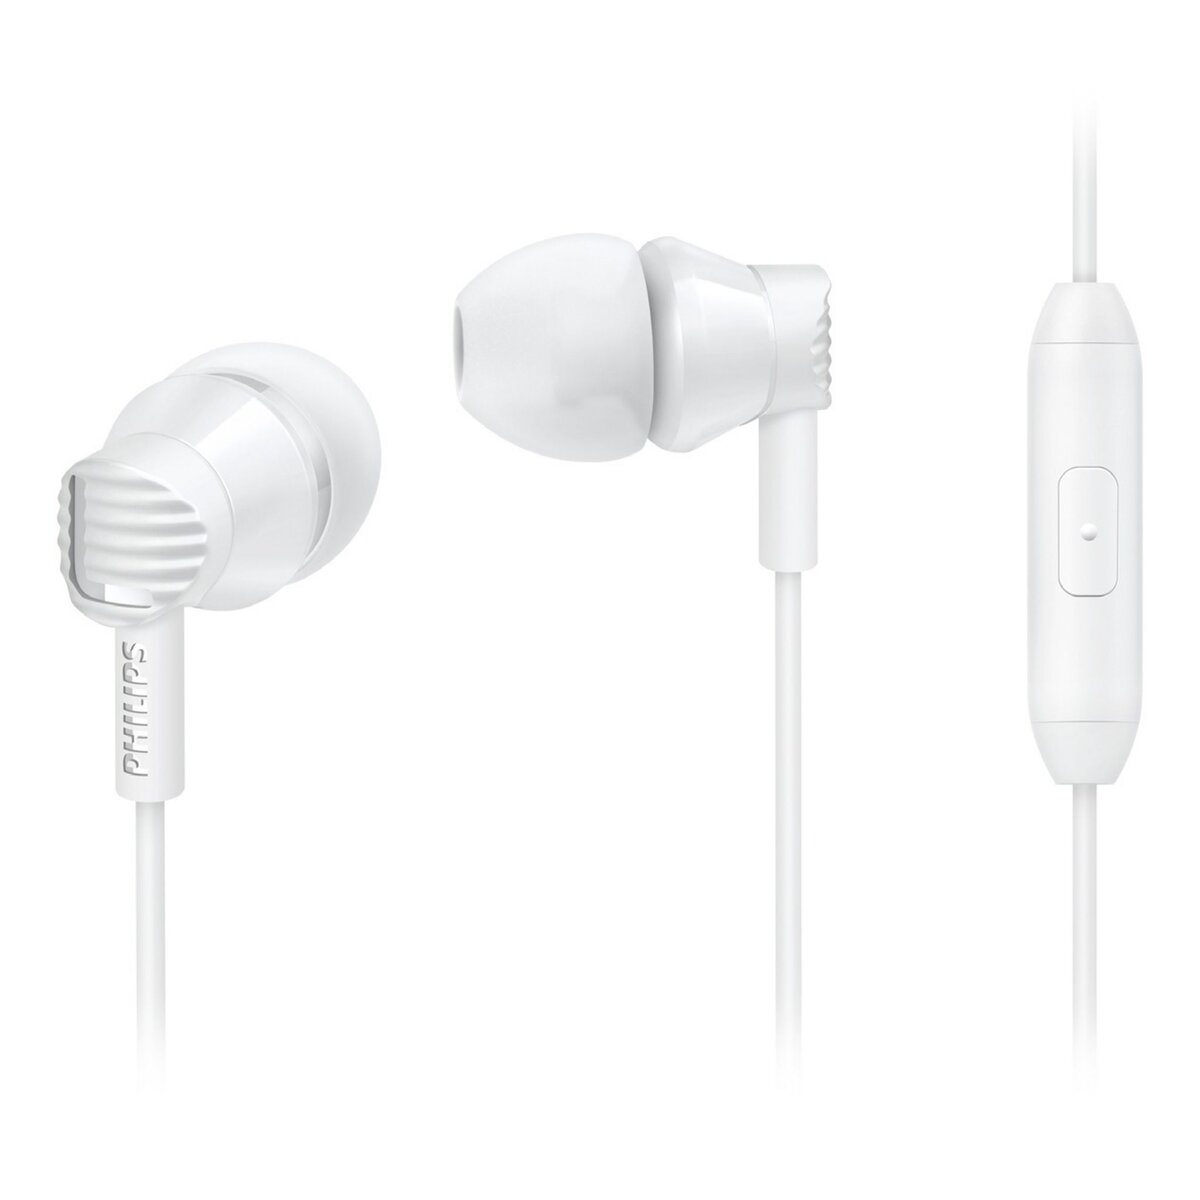 PHILIPS SHE3805WT - Blanc - Ecouteurs